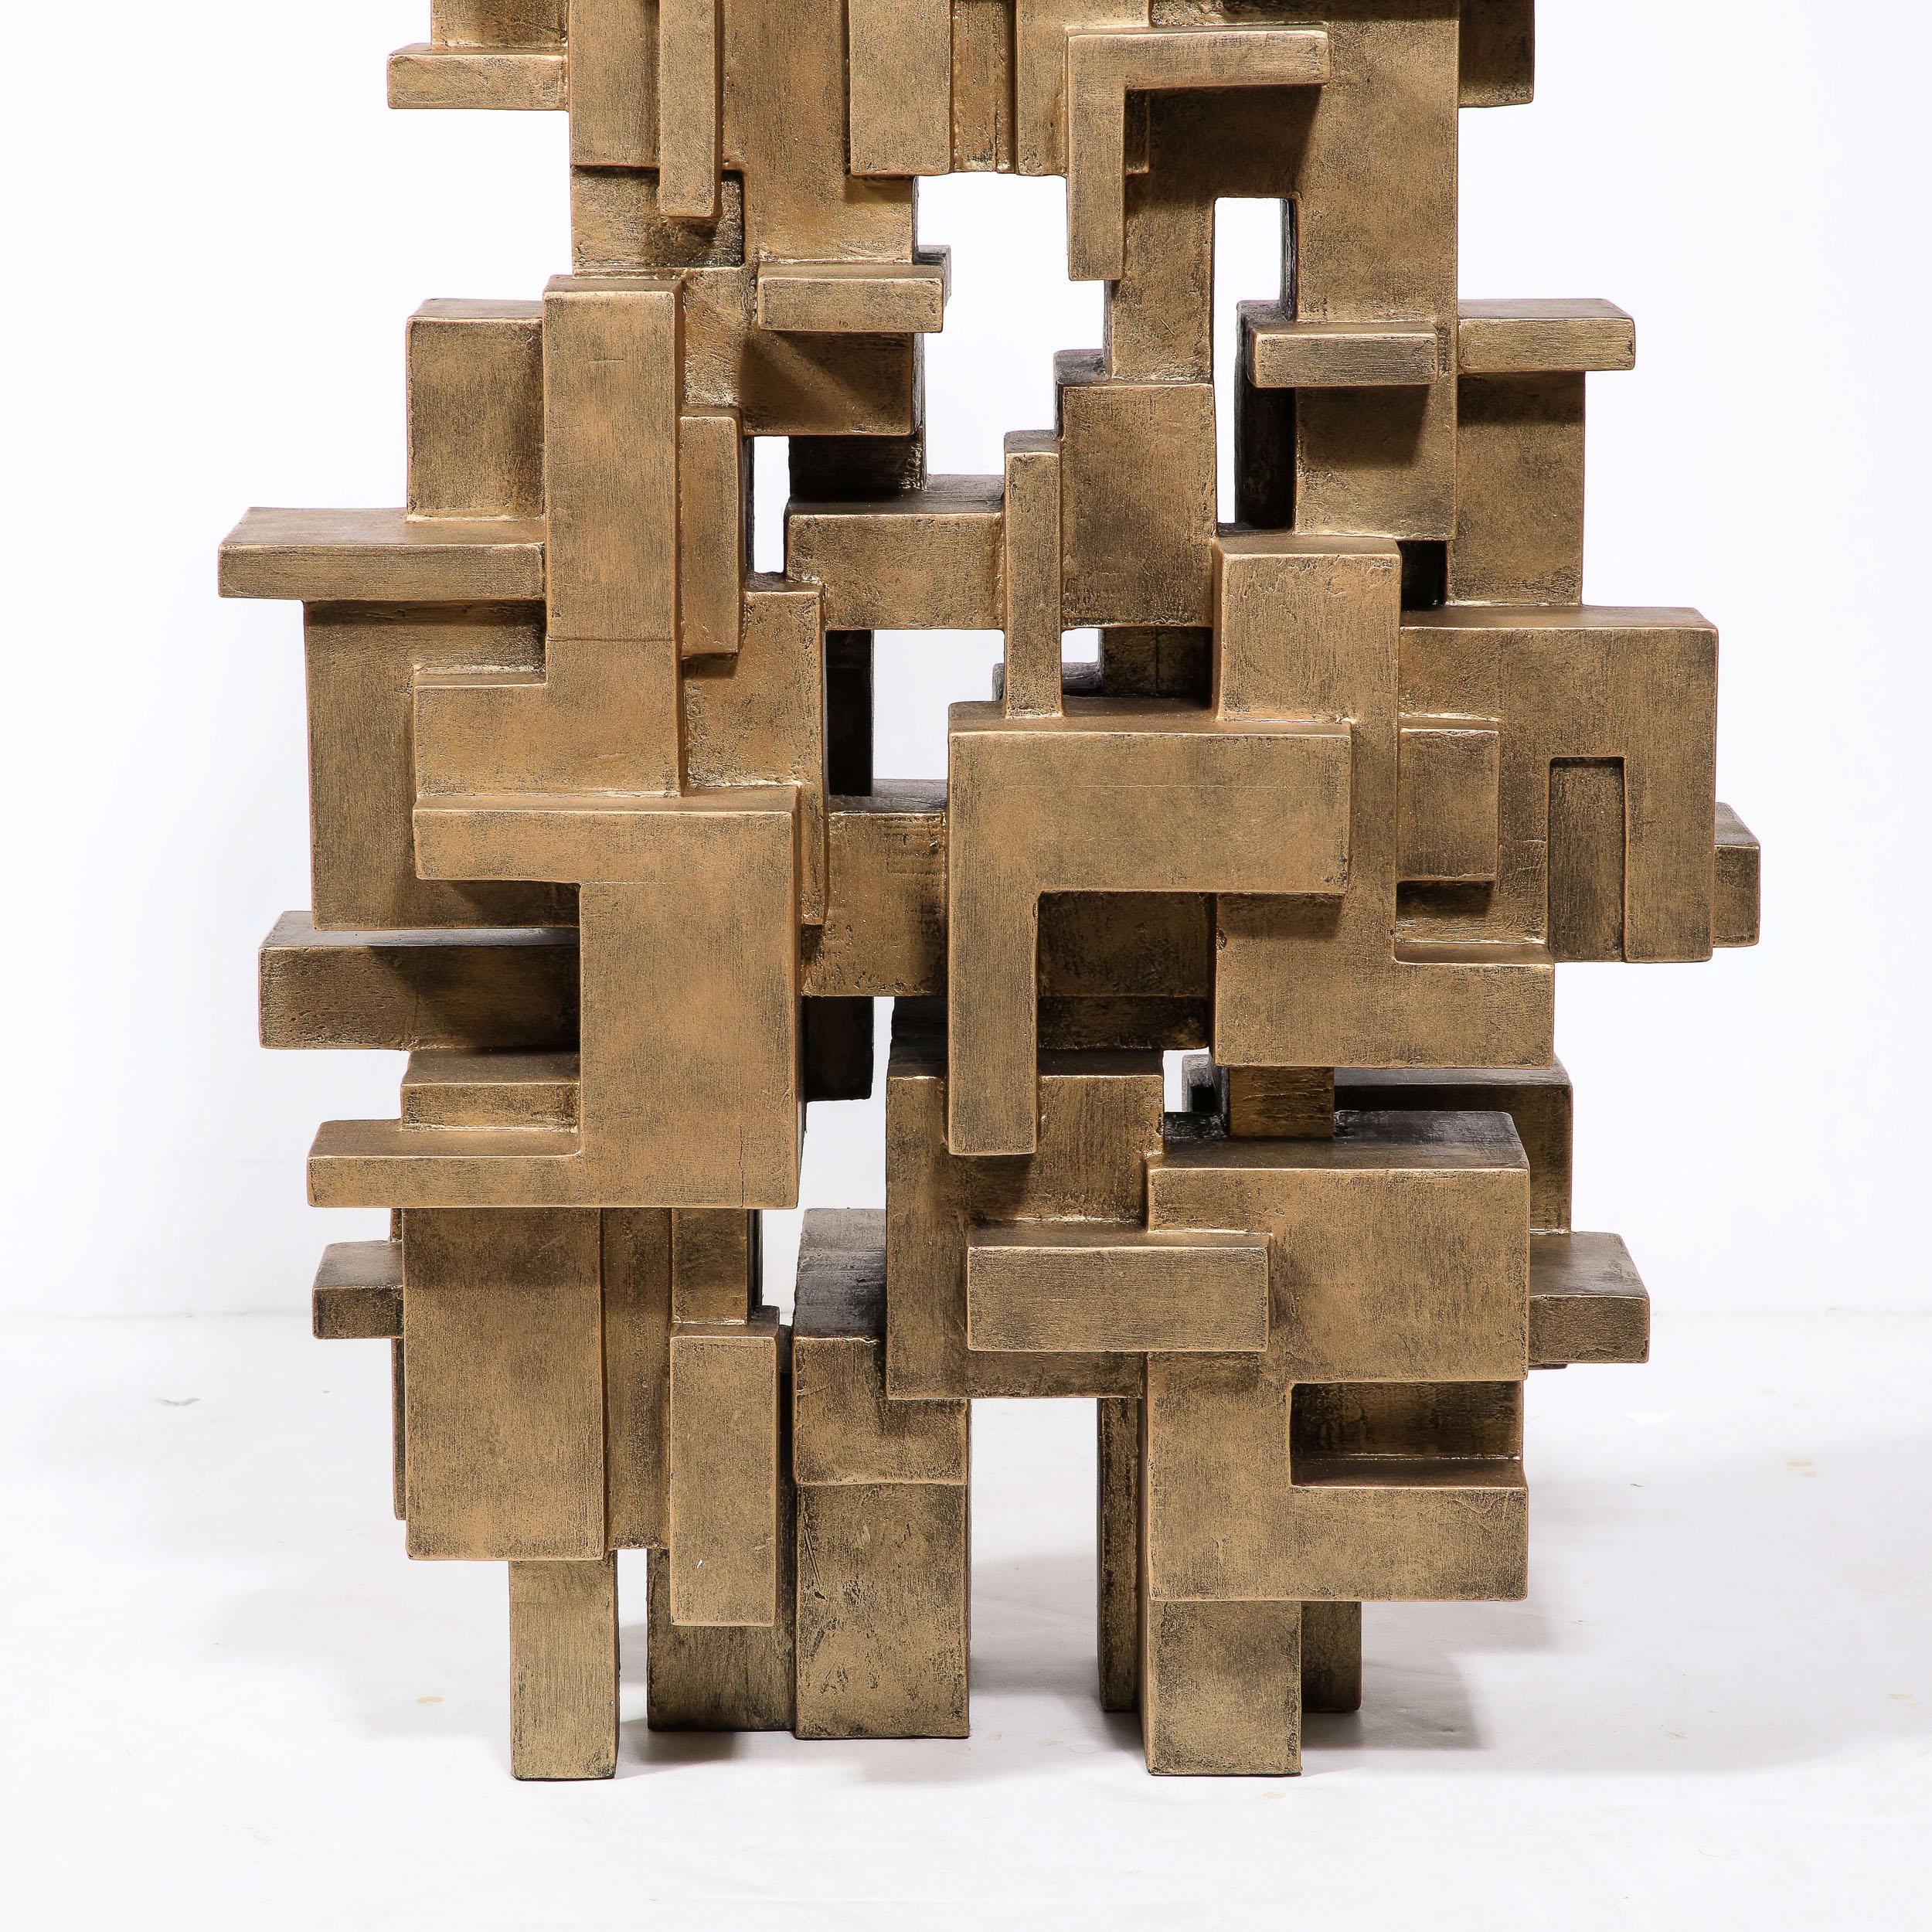 This beautiful and dynamic isometric grid sculpture was realized by the esteemed American artist Dan Schneiger in the United States circa 2010. In dialogue with the work of the great 20th century masters Louise Nevelson and Antony Gormley, this work